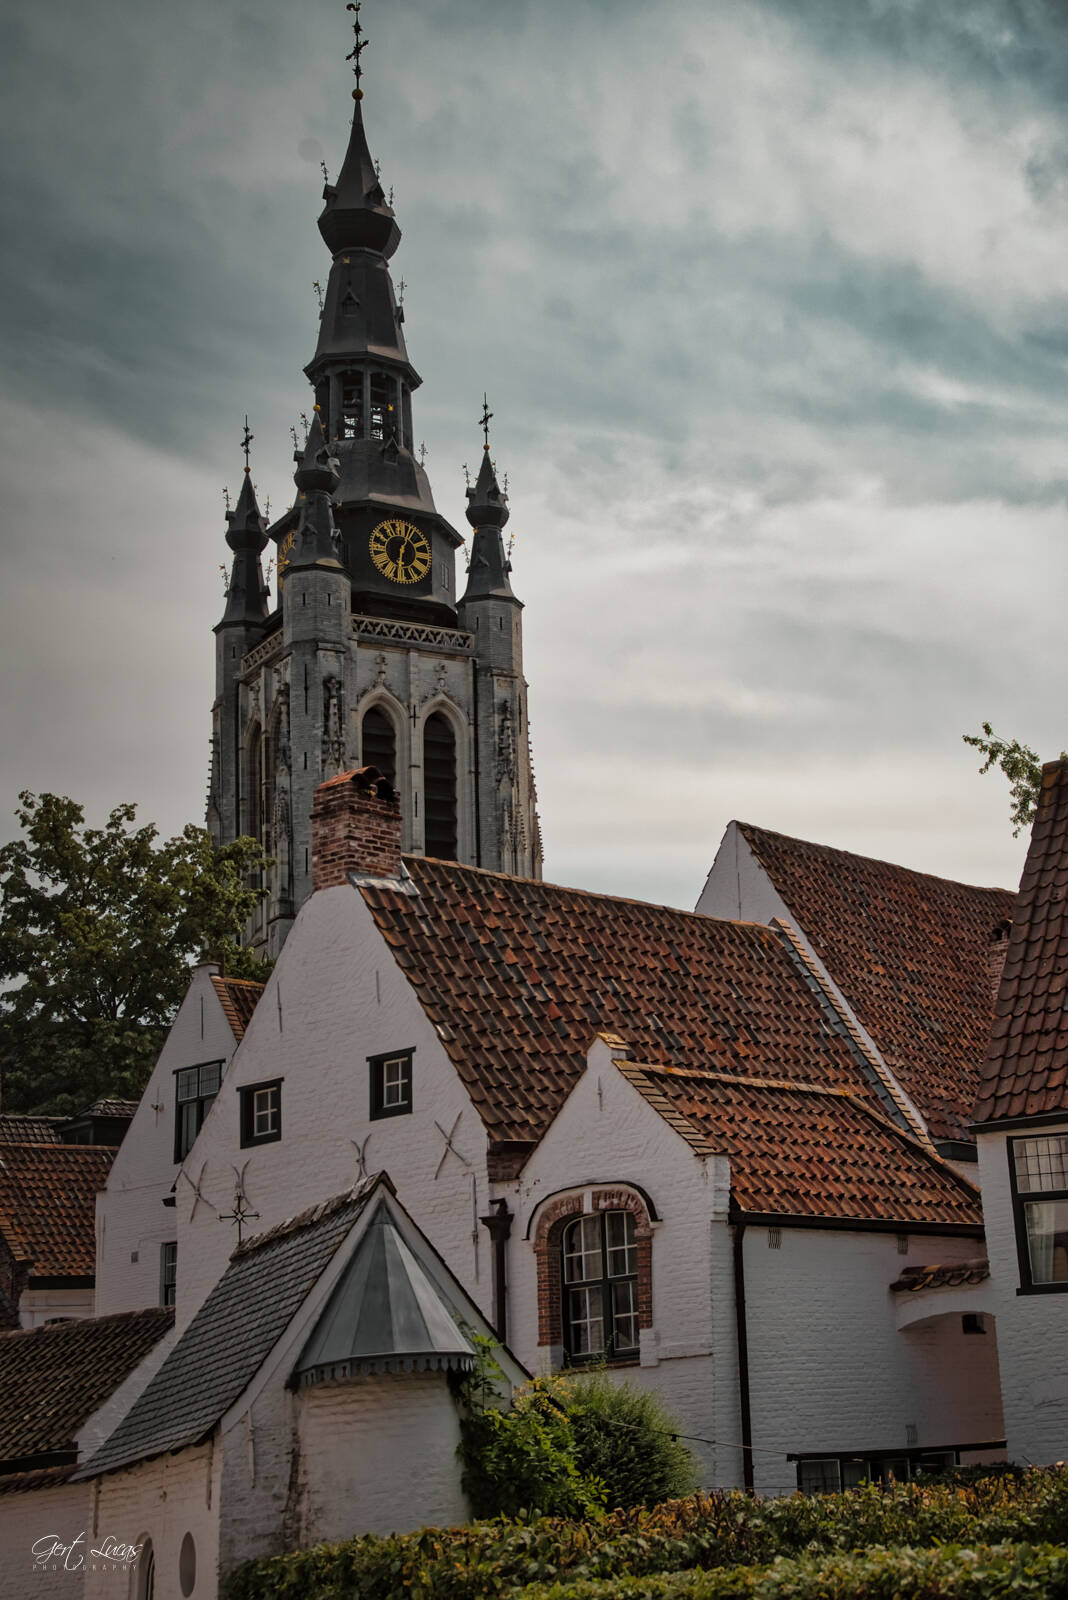 Image of Beguinage of Kortrijk by Gert Lucas